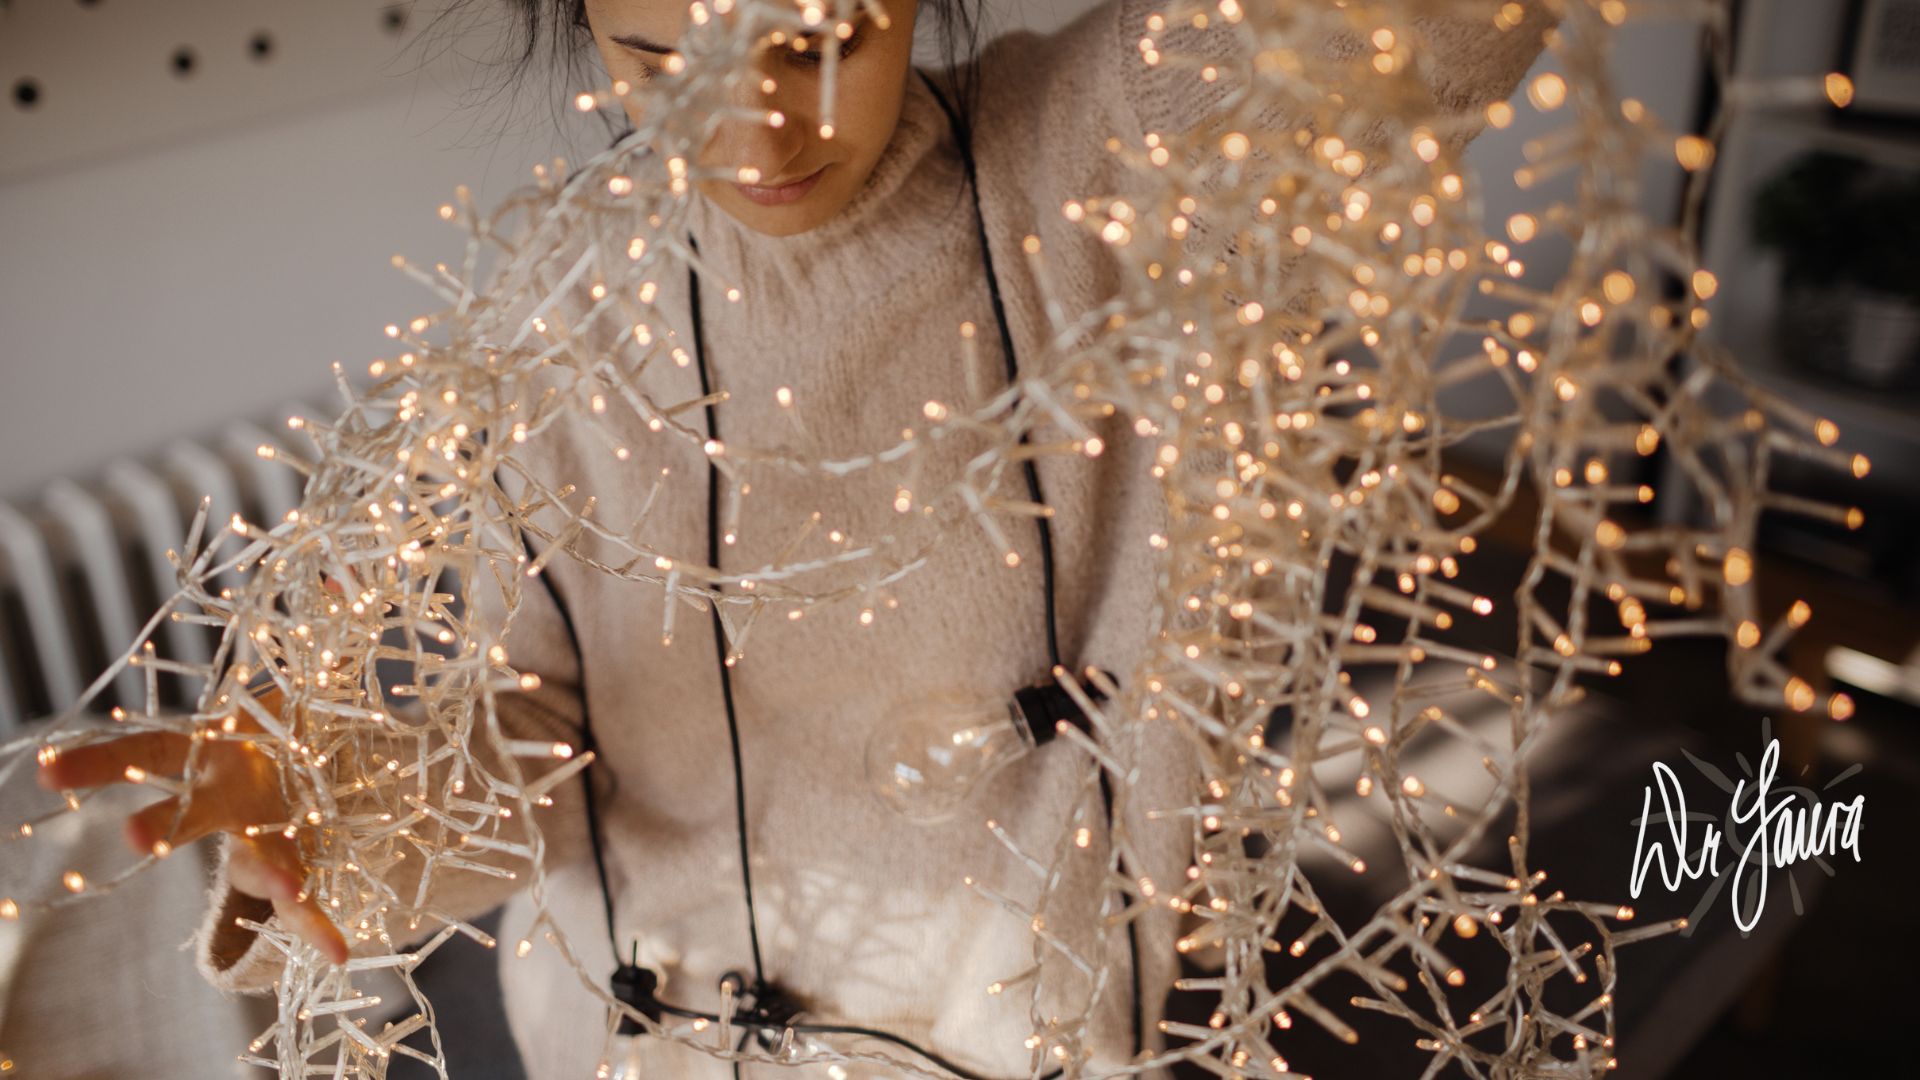 Woman wearing a white sweater holds up string lights